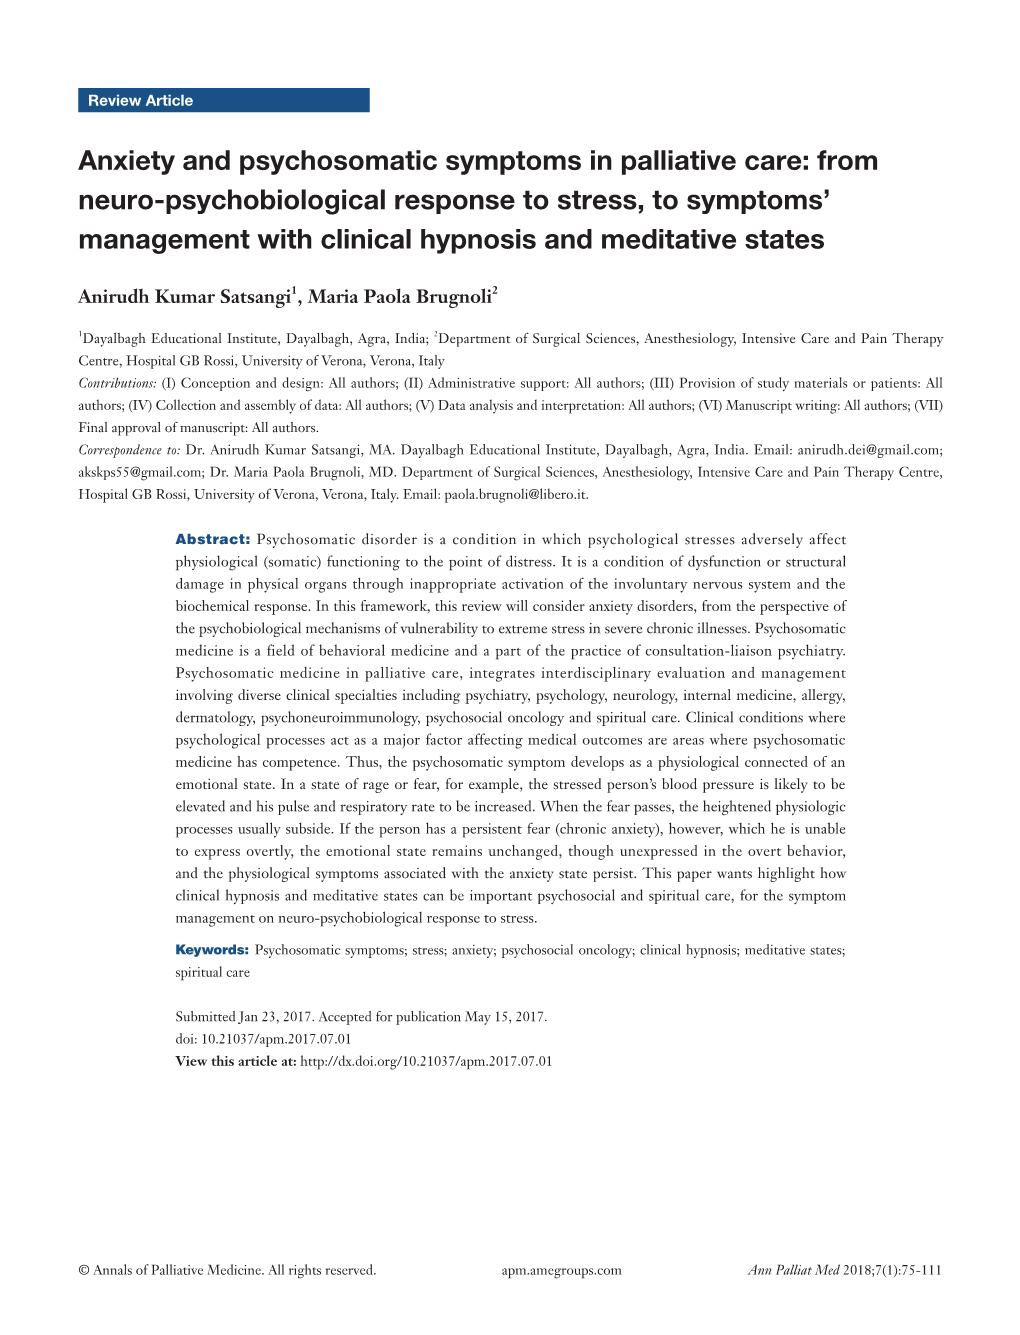 Anxiety and Psychosomatic Symptoms in Palliative Care: from Neuro-Psychobiological Response to Stress, to Symptoms' Management